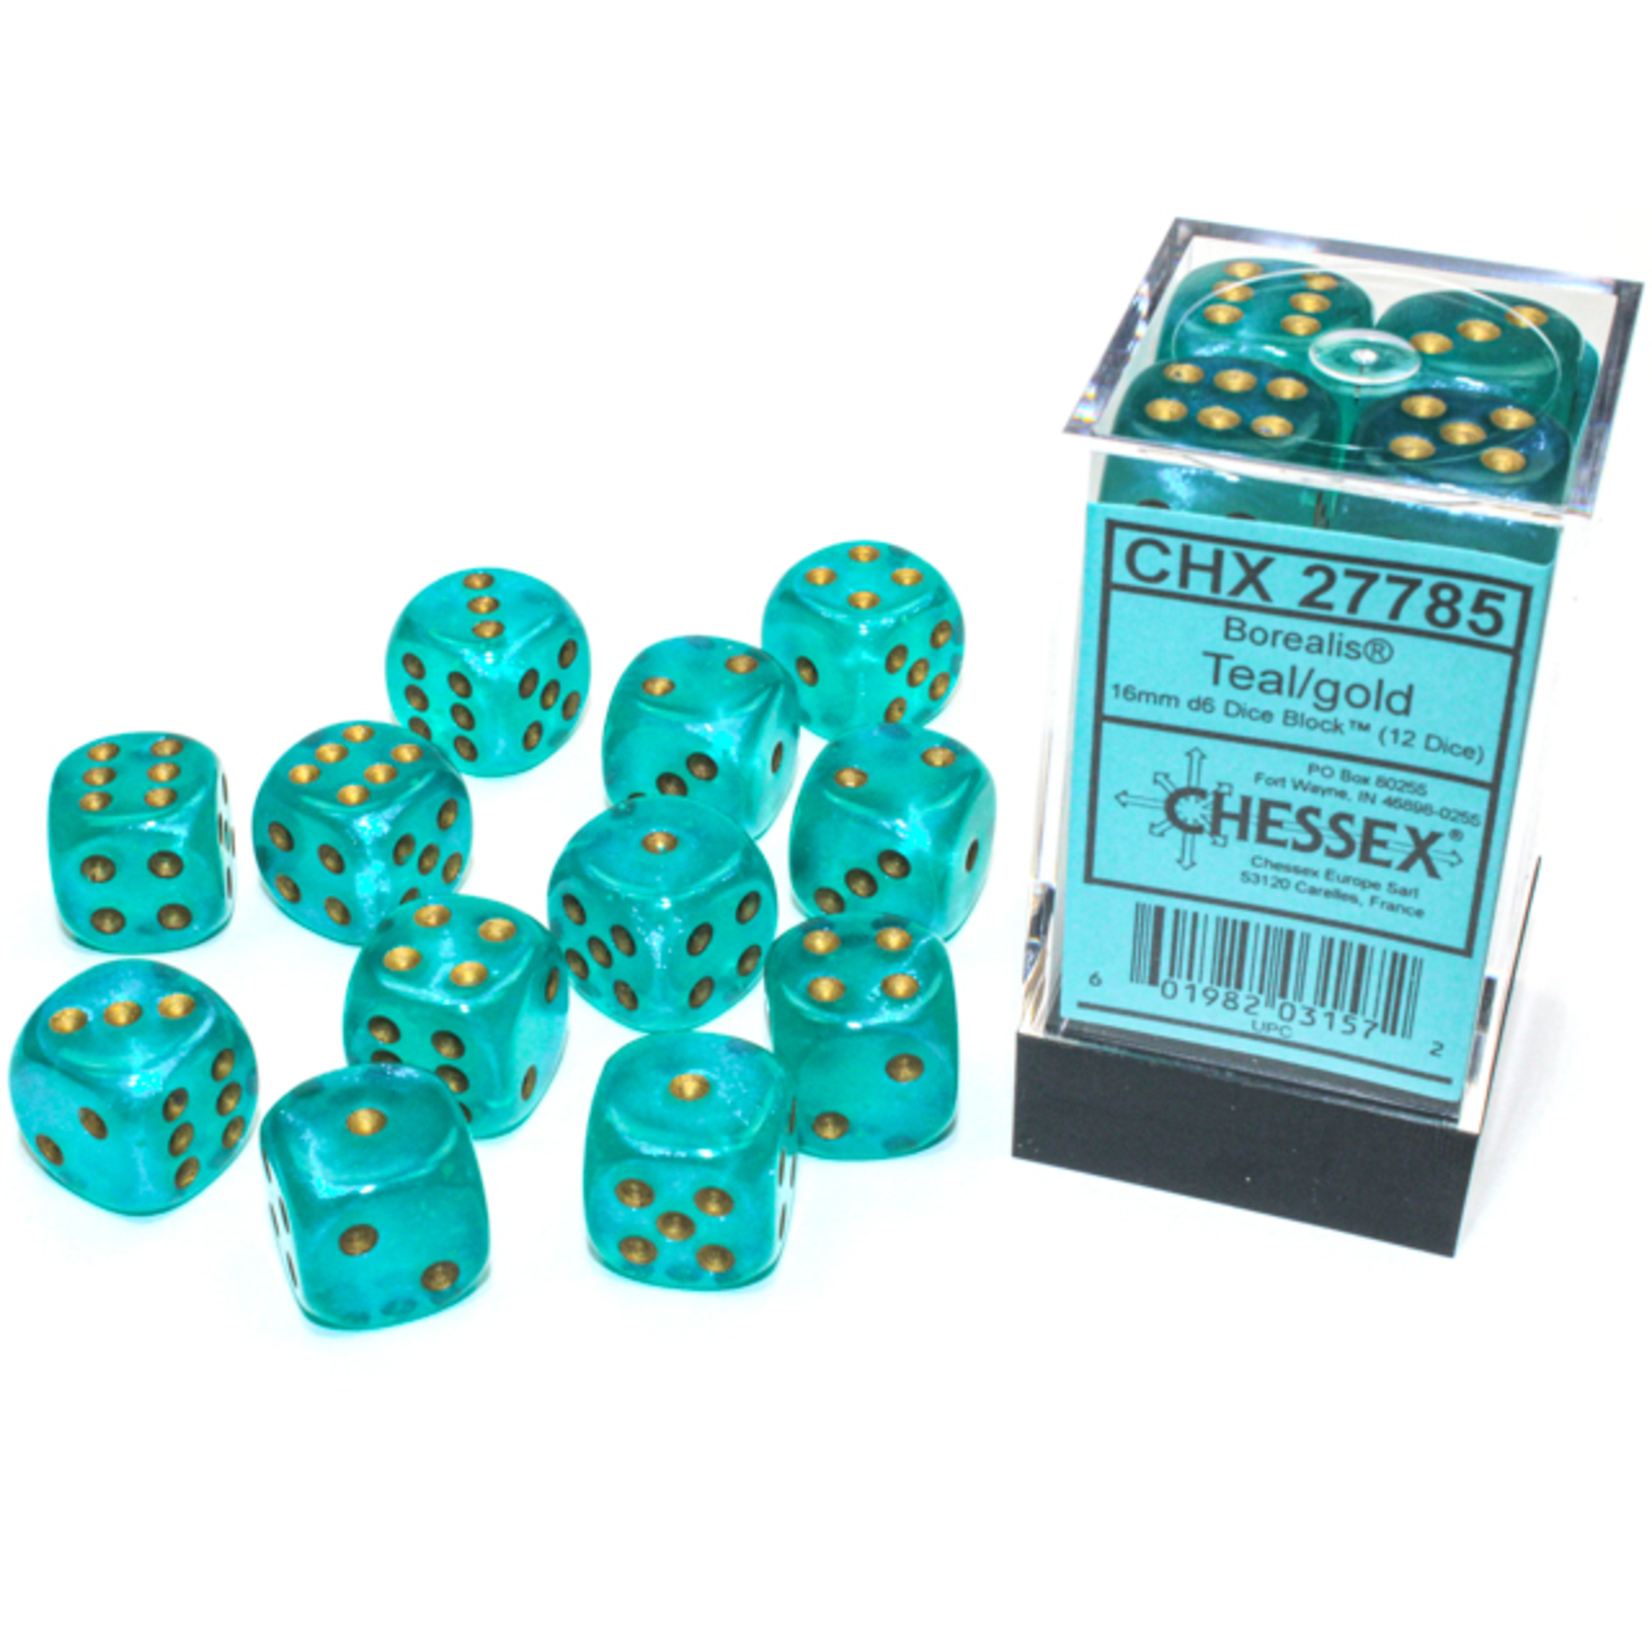 Chessex D6 Cube 16mm Borealis Luminary Teal with Gold Pips (CHX)